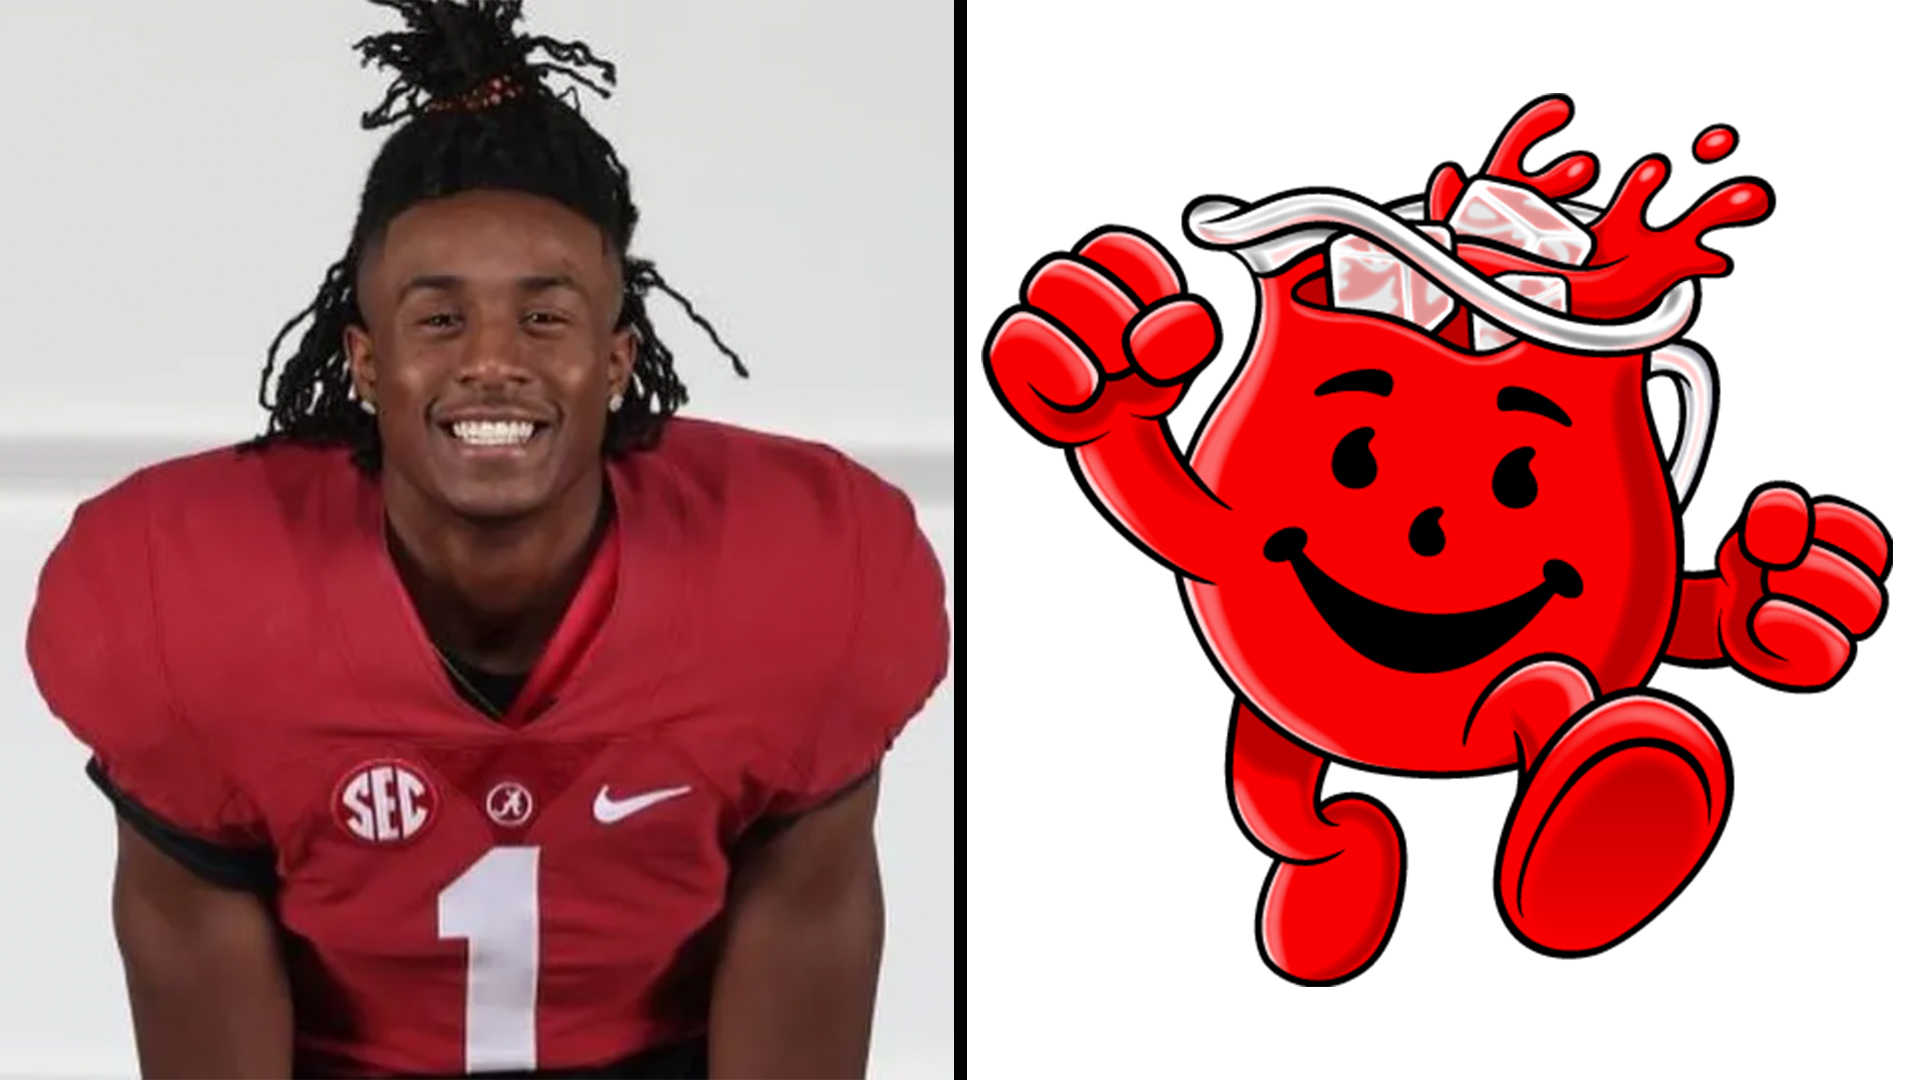 Alabama Crimson Tide's Ga'Quincy 'Kool-Aid' McKinstry Inks Deal With The Brand Almost Two Weeks After Manifesting It